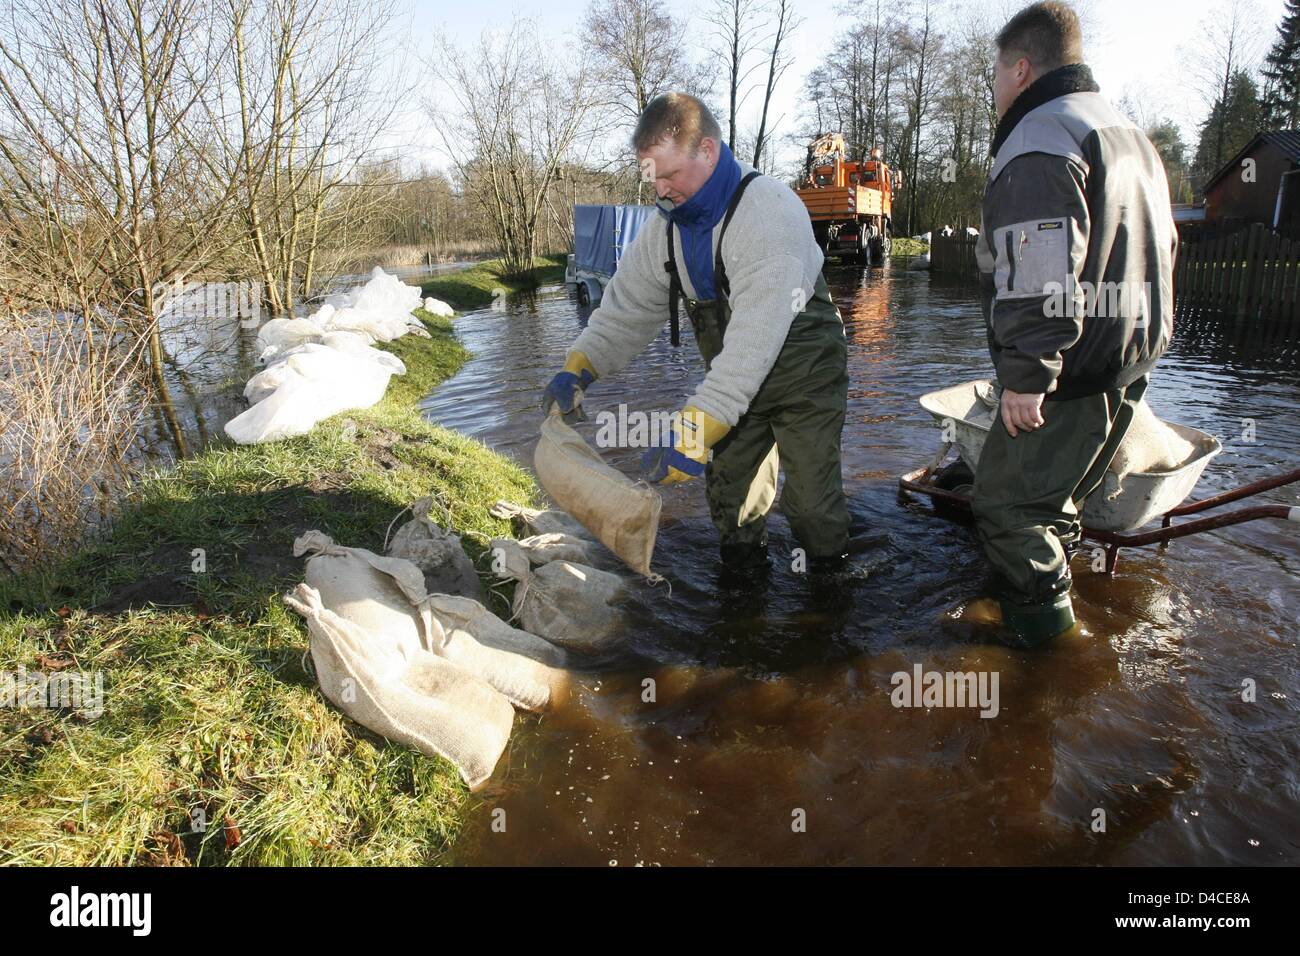 People try to keep out the water from Tostedt-Wistedt, Germany, 22 January 2008. Extensive continuous rain flooded streets and cellars in Lower Saxony. An evacuation did not become necessary for the dykes and buildings could be secured with more than 5,000 sandbags. Photo: MAURIZIO GAMBARINI Stock Photo